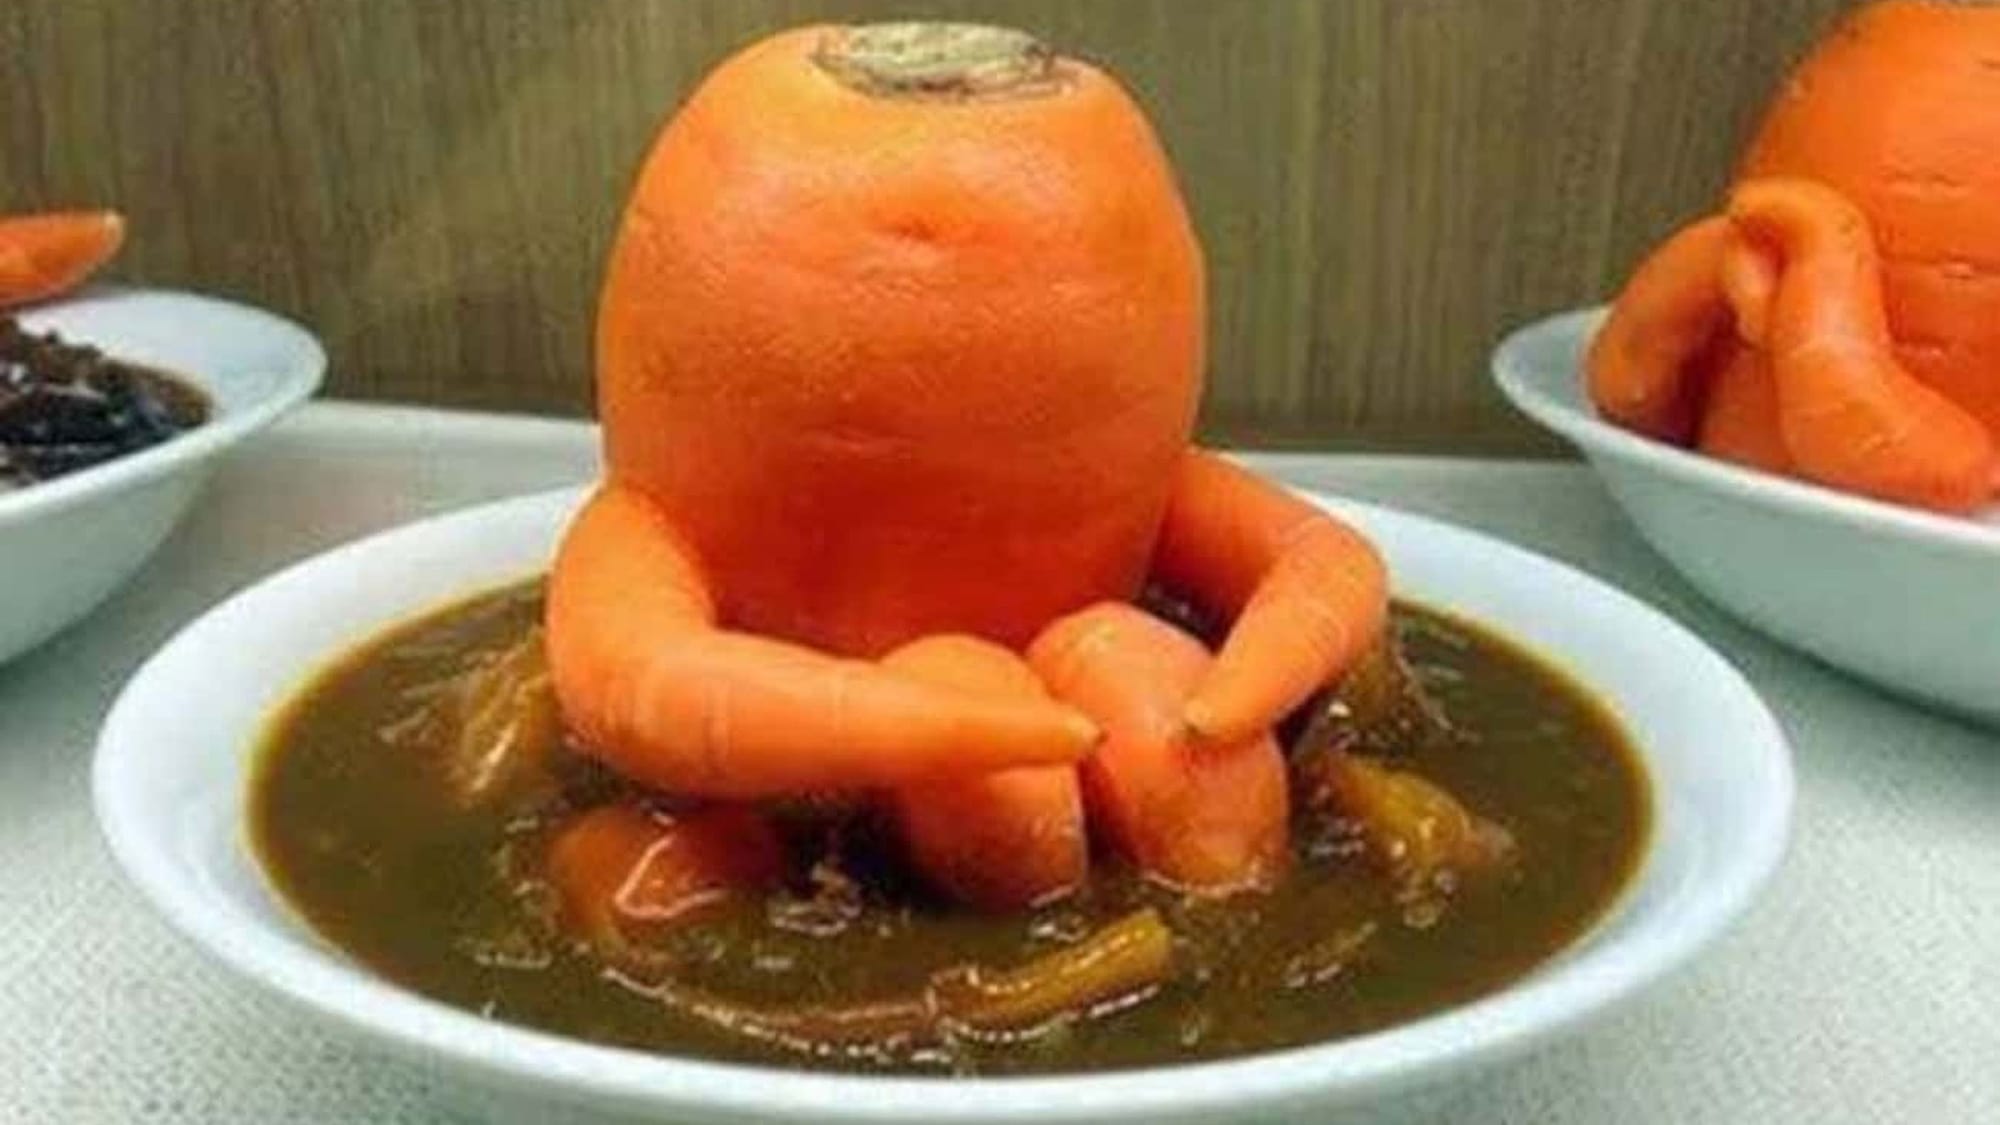 Meme image of a carrot sculpture resembling a person, comfortably seated, with carrot arms wrapped around carrot knees, in a bowl of soup